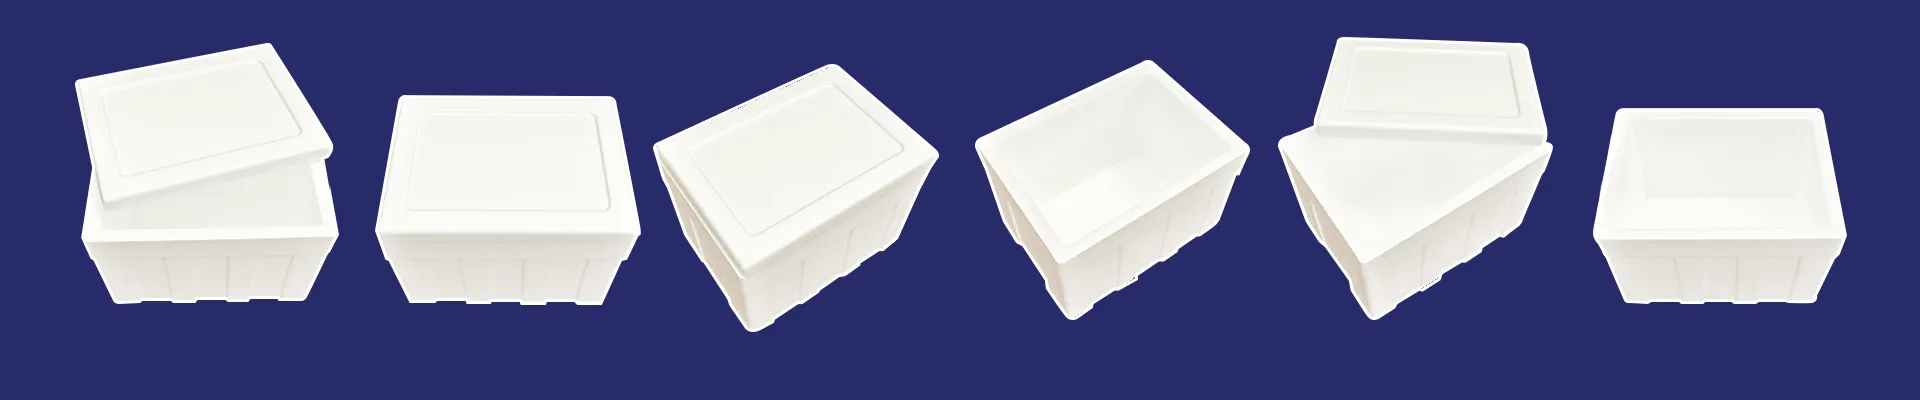 Thermocol Insulated Boxes  B2B Suppliers & Manufacturers in India